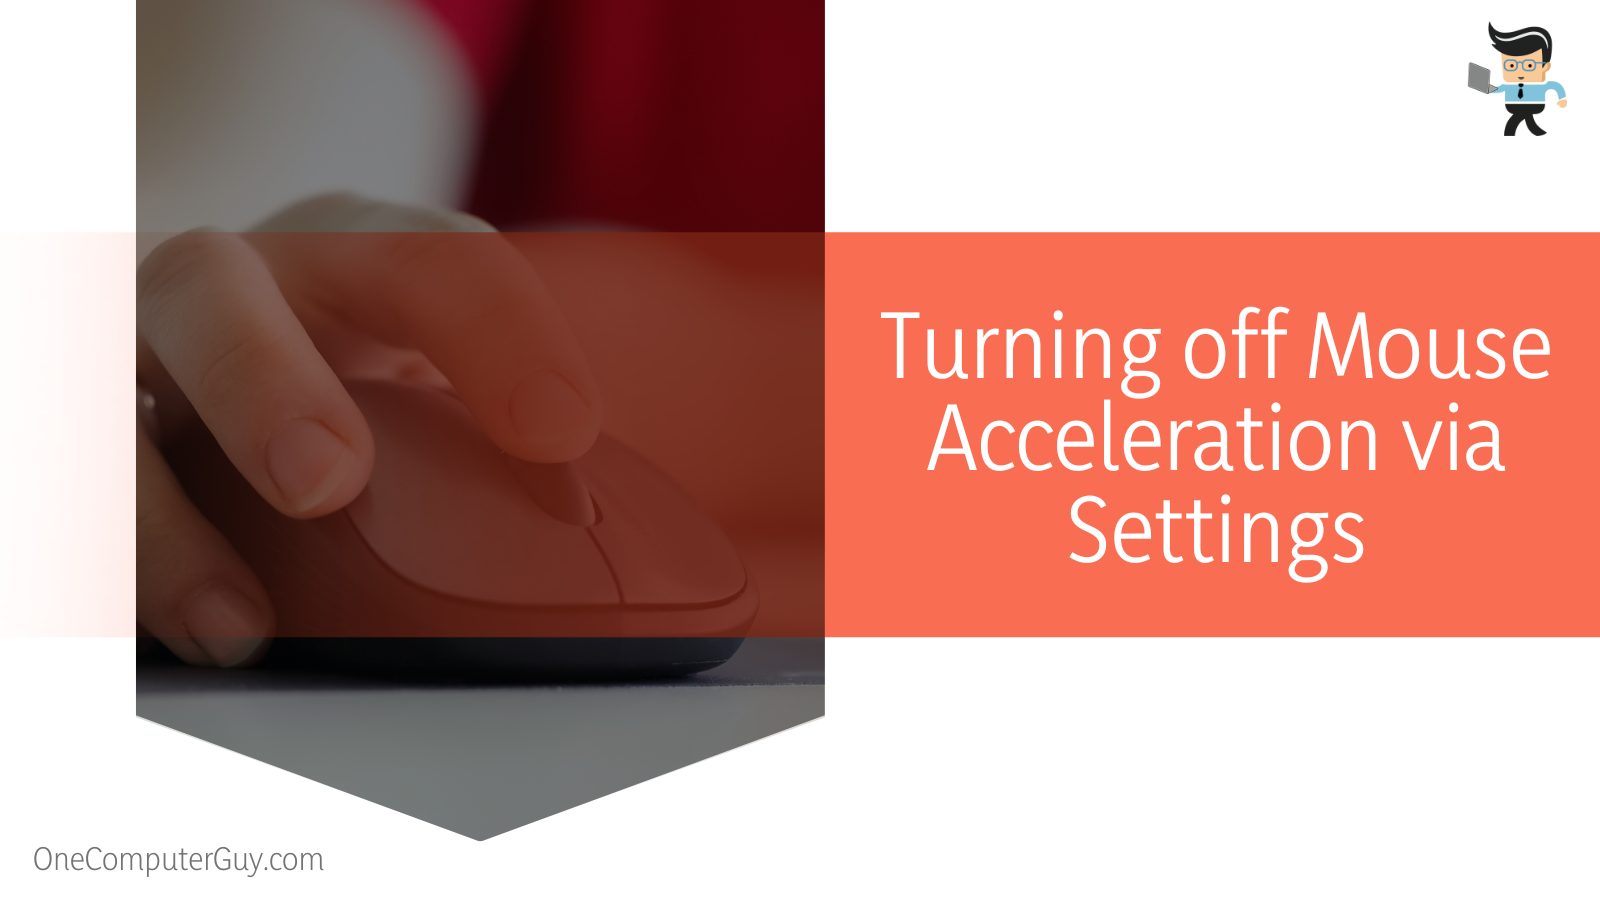 Turning off Mouse Acceleration via Settings